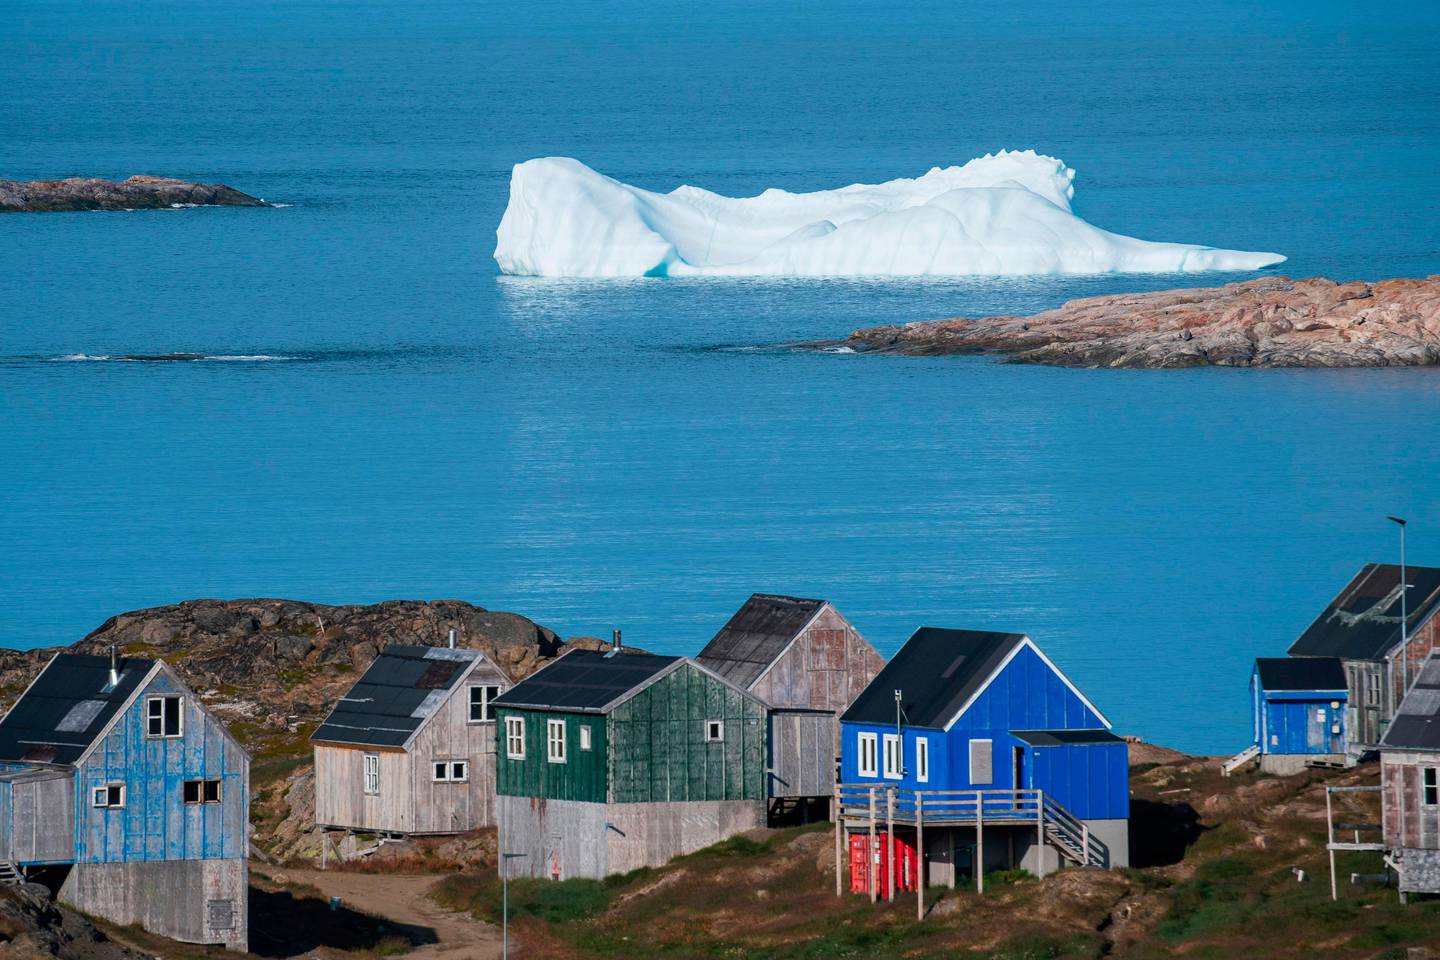 TOPSHOT - Icebergs float behind the town of Kulusuk in Greenland on August 16, 2019. - Greenland is not for sale, the mineral-rich island said on August 16, 2019, after a newspaper reported that US President Donald Trump was asking advisers whether it's possible for the United States to buy the Arctic island. (Photo by Jonathan NACKSTRAND / AFP)